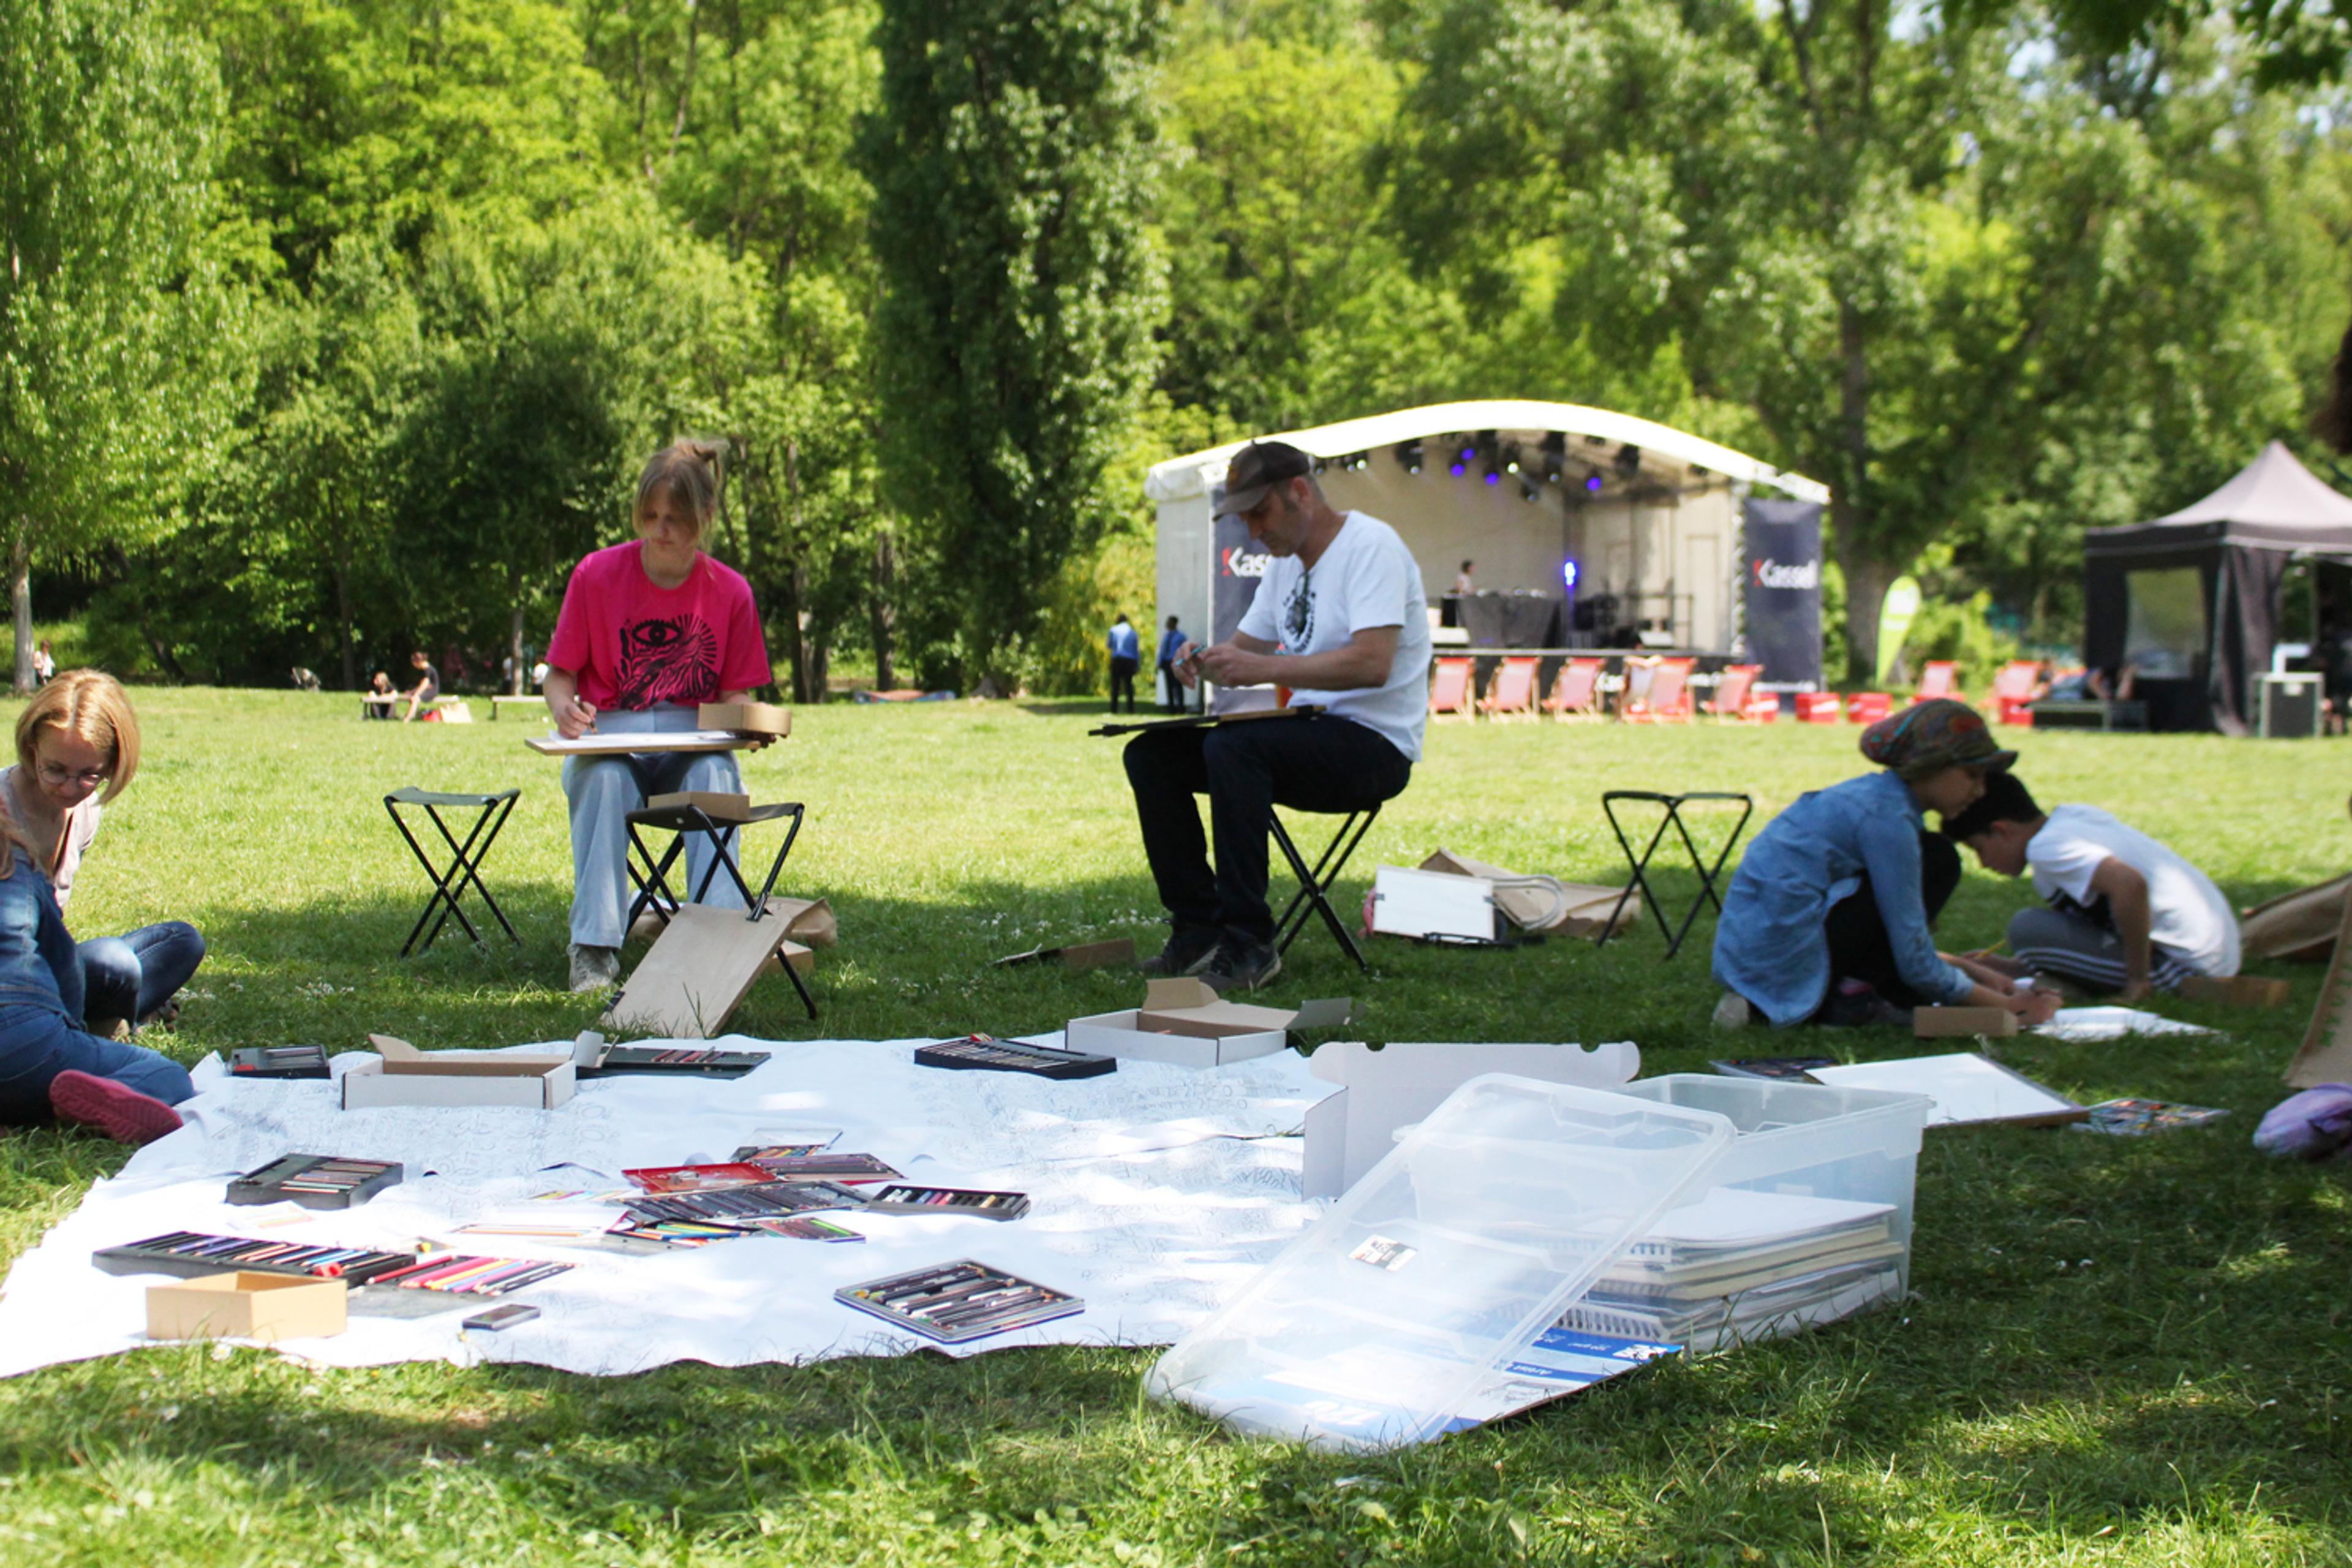 A picknick? No there are drawing materials and 5 people at folded chairs making drawings in a park.